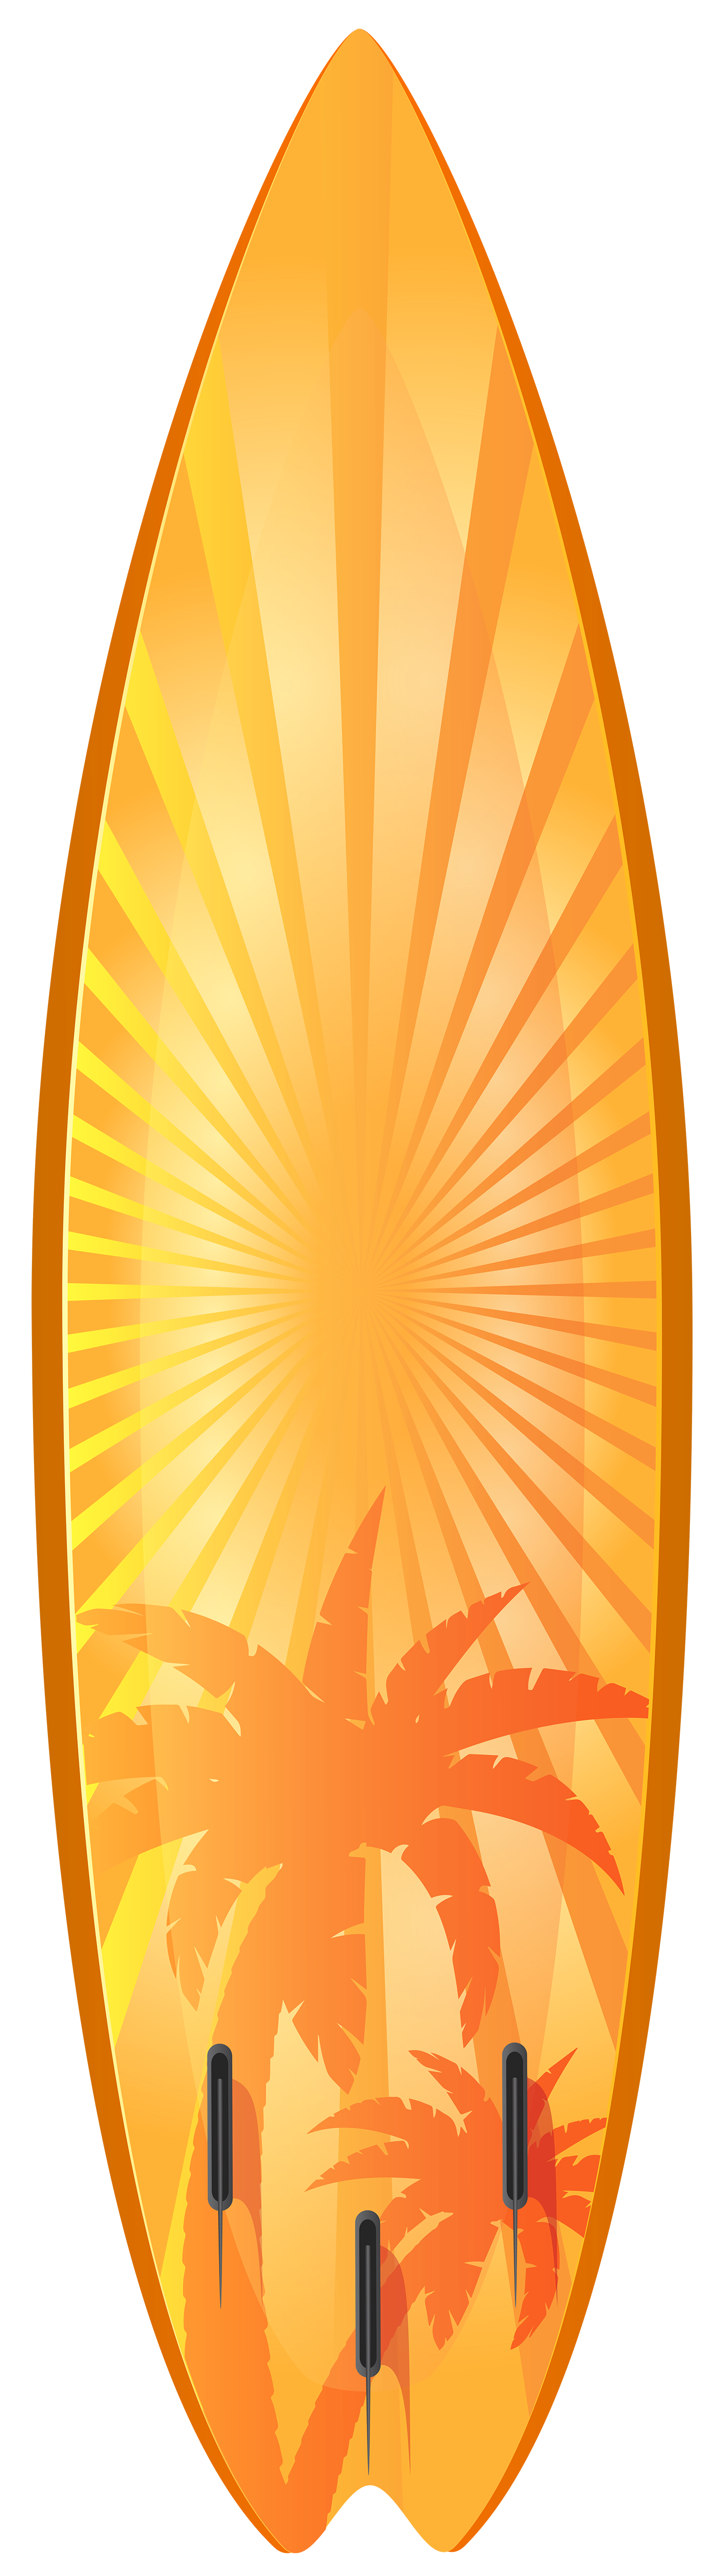 Orange Surfboard With Palm Trees Transparent Image Clipart